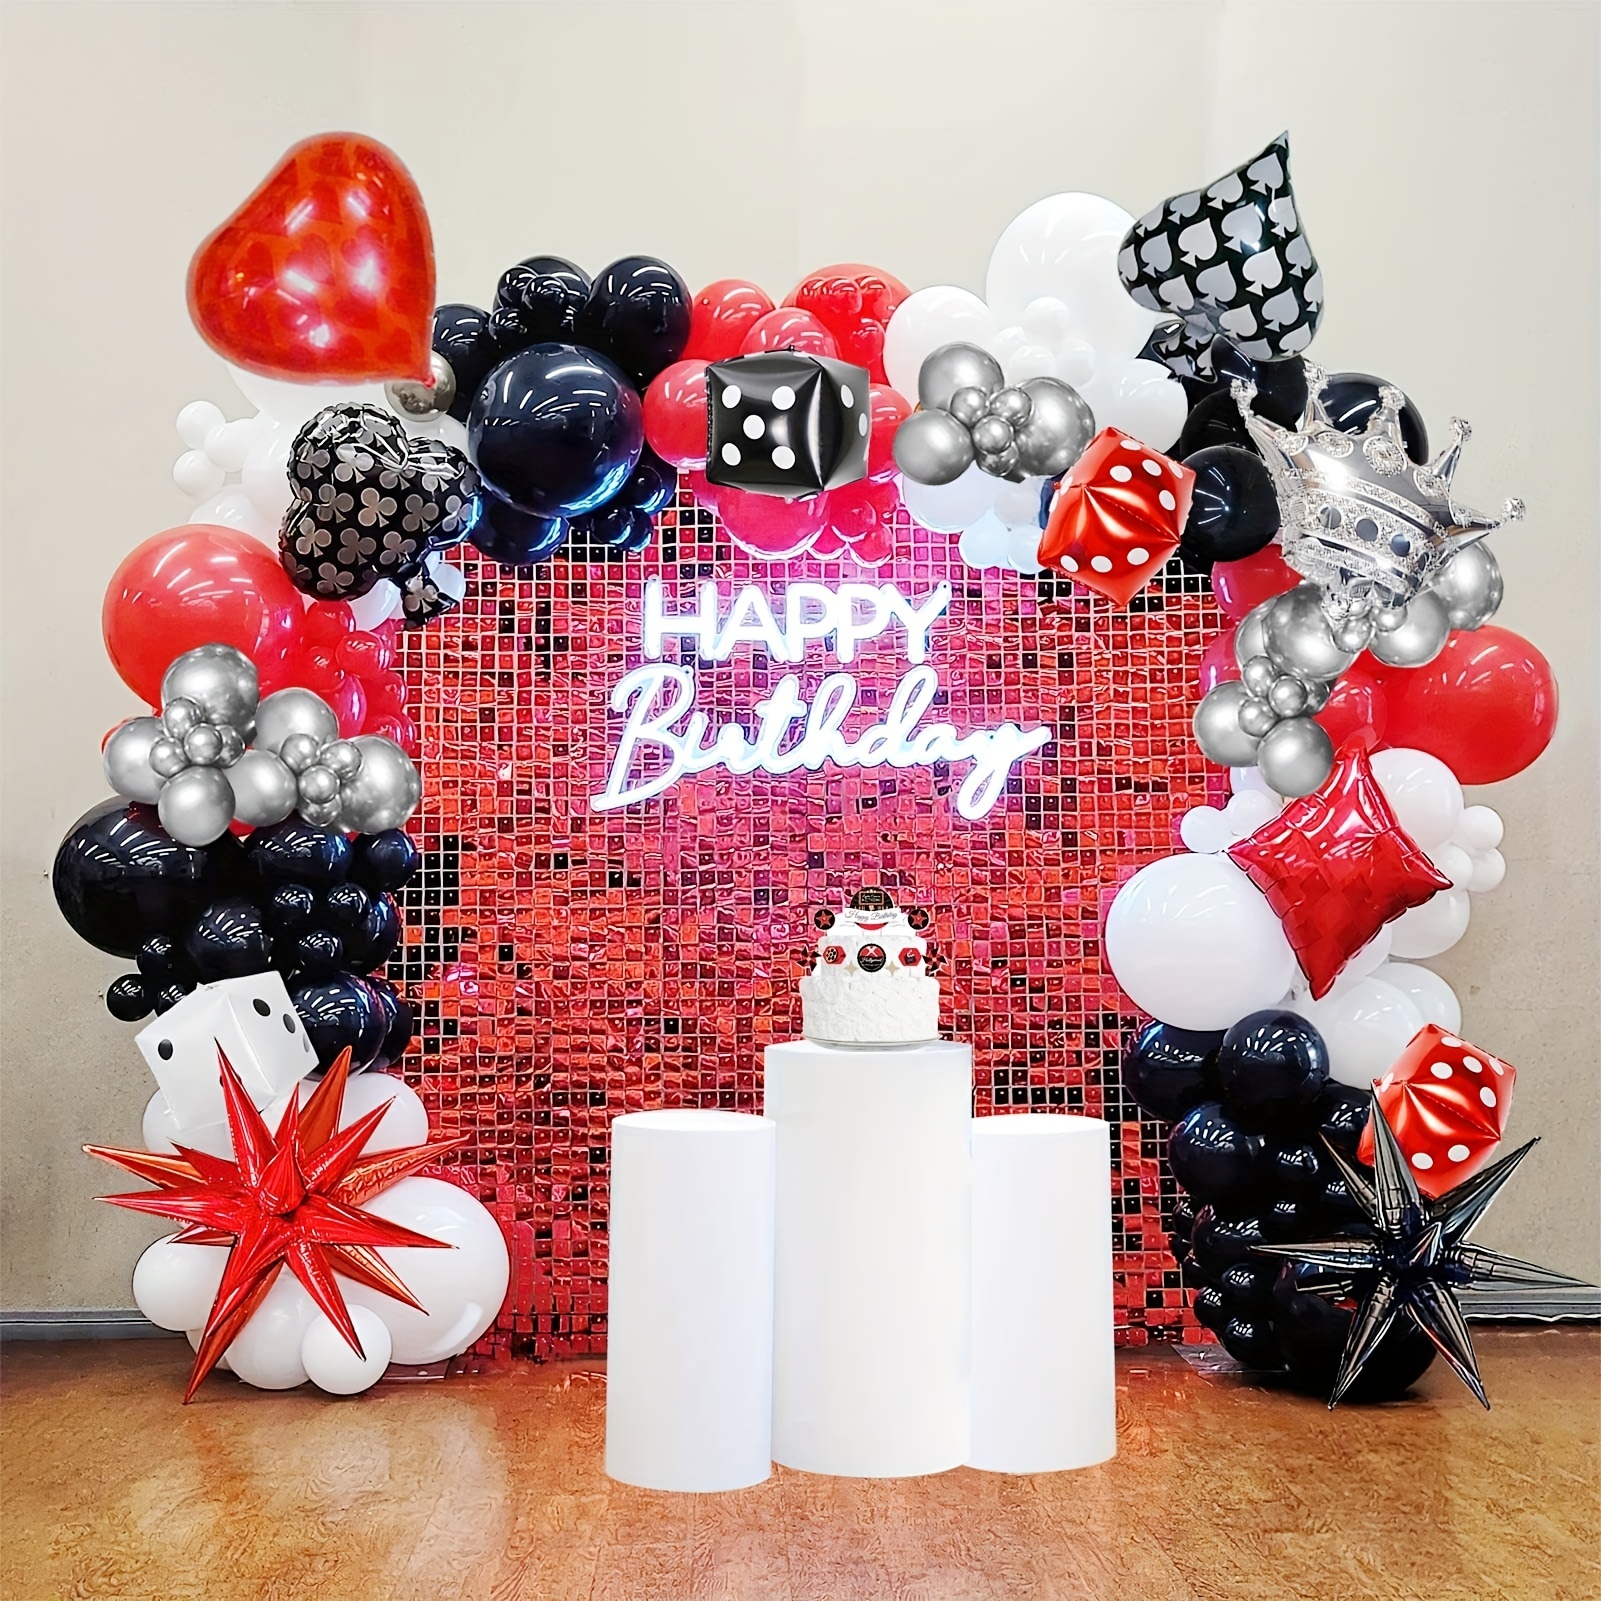 Casino Themed Party Decorations, Red, Black And Silvery Casino Balloon  Wreath Set With Starburst Dice, Crown And Poker Balloons, Birthday Las Vegas  Poker Night Decorations, Photo Prop, Party Scene Decor Arrangement, Room